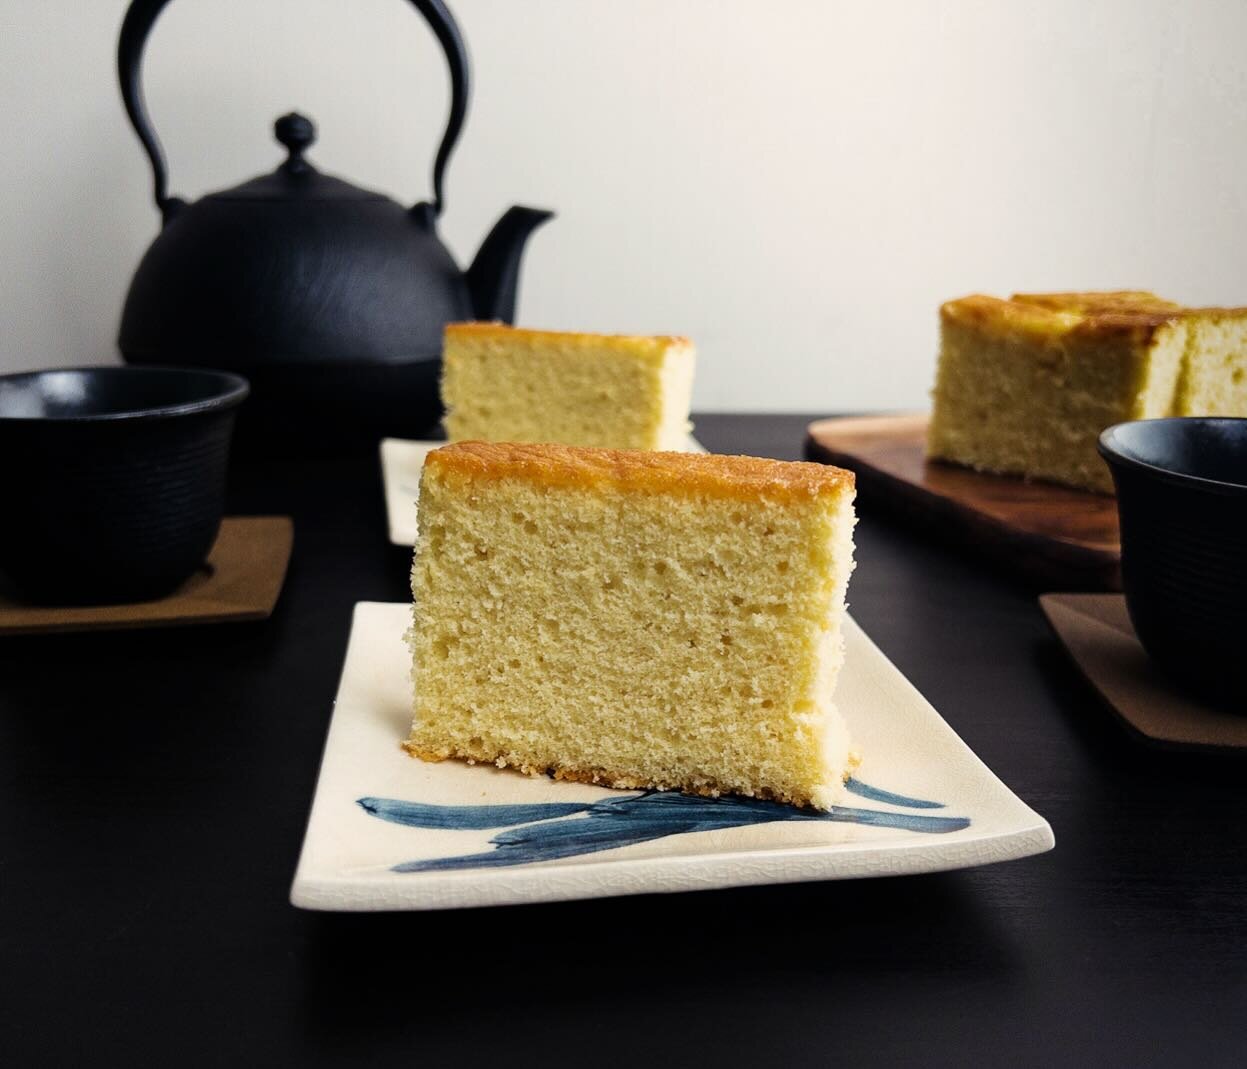 Japan 🇯🇵 2024: Castella Cake 
A simple tea-cake for a Spring race in Japan 🌸 🍞 🫖 
.
.
.
#f1cookbook #f1food #f1cooking #f1  #formula1 #food #f1foodie #cooking #internationalcuisine #homemade #recipes #raceweekend